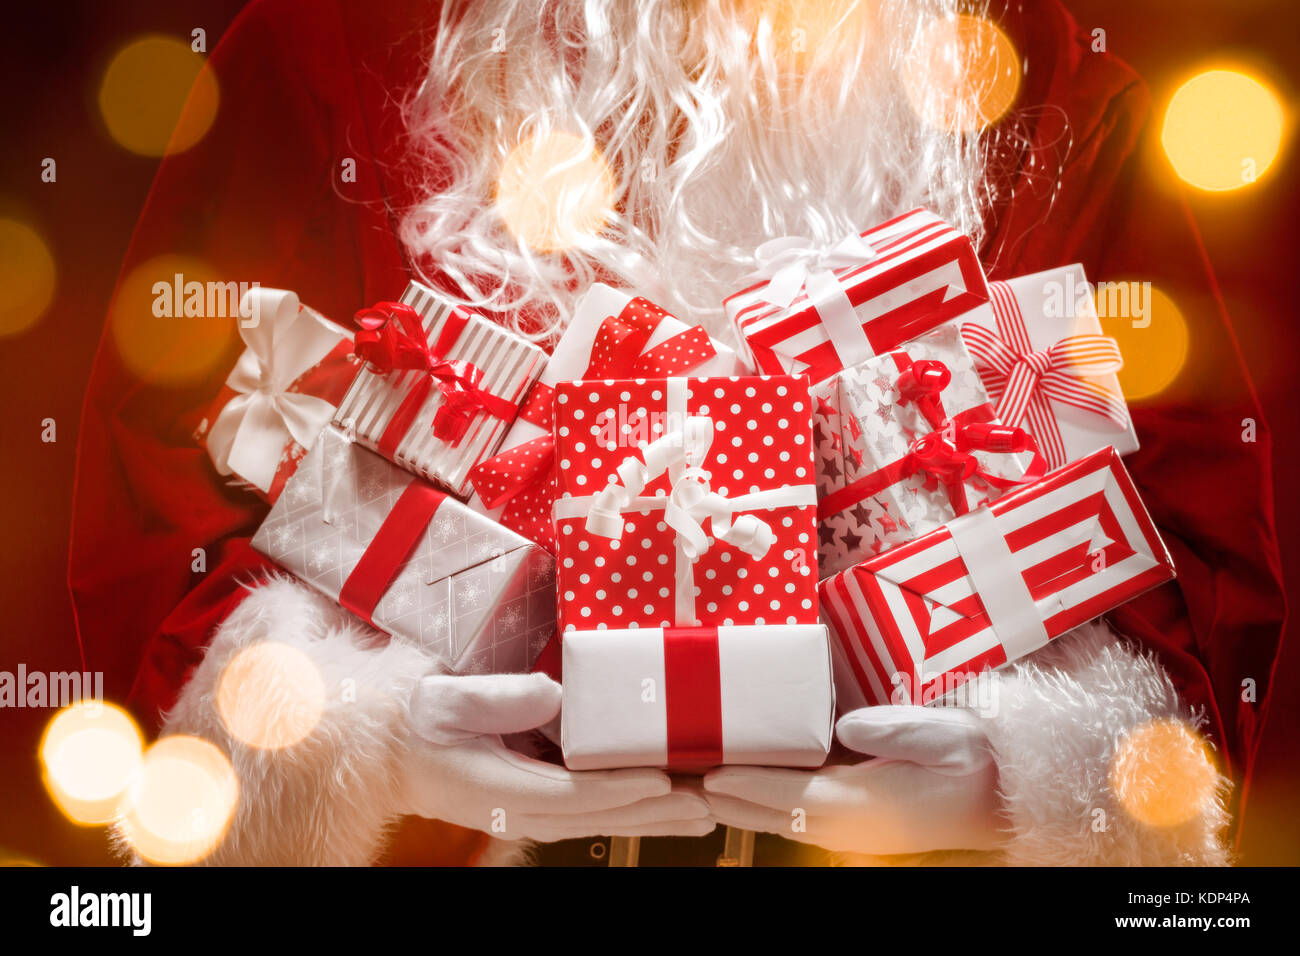 Santa Claus holding gift boxes with Christmas lights. Stock Photo